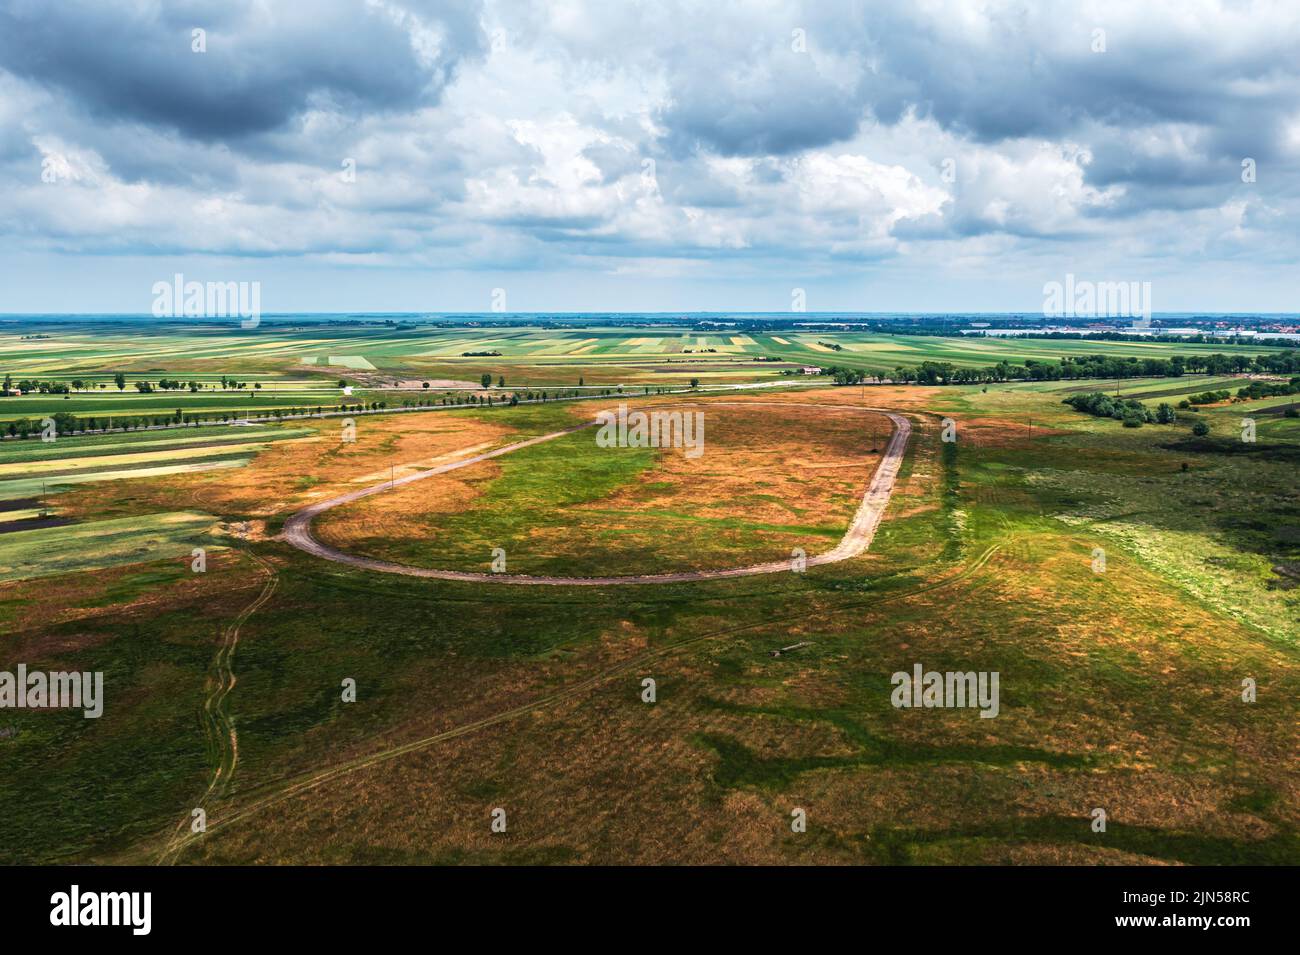 Aerial shot of old abandoned horse race track in plain landscape, drone pov high angle view Stock Photo